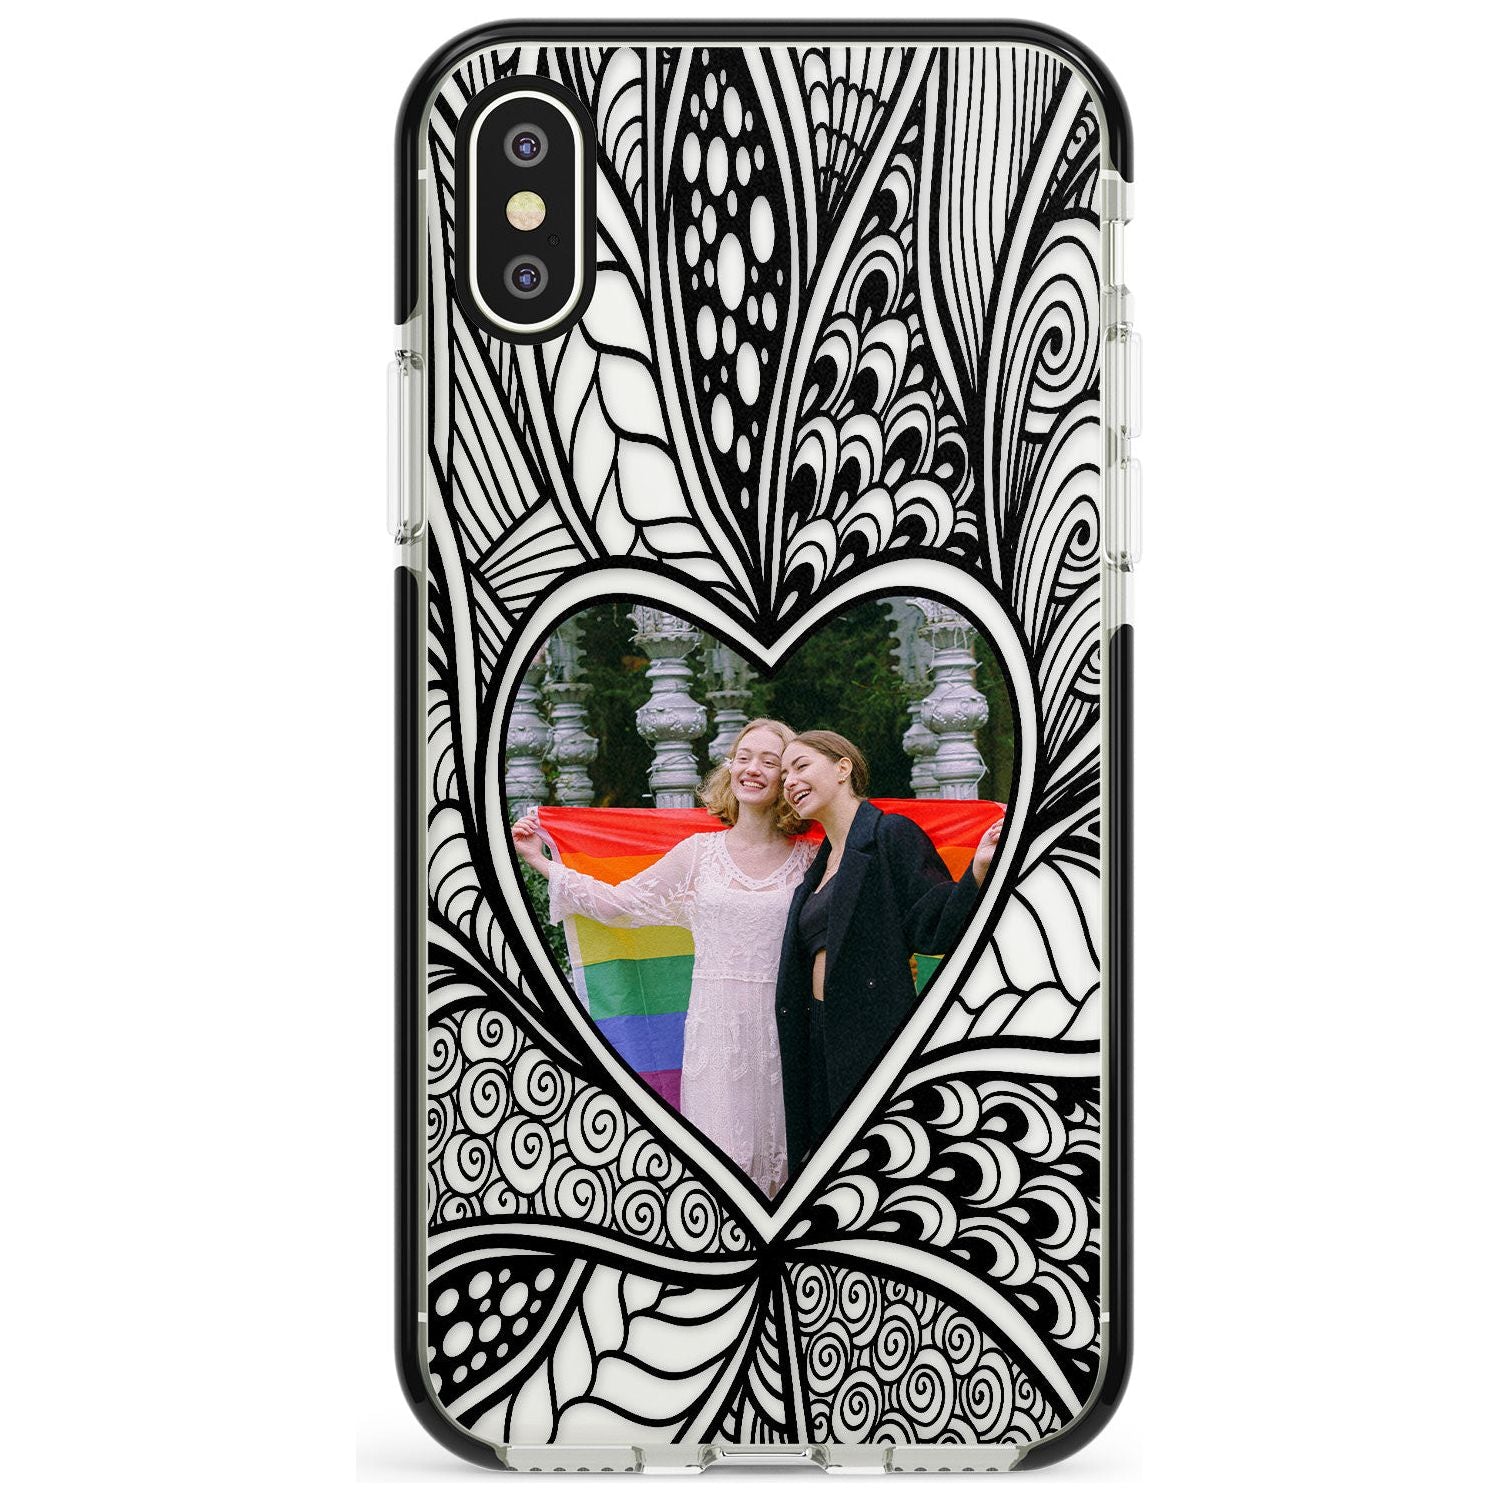 Personalised Henna Heart Photo Case Black Impact Phone Case for iPhone X XS Max XR